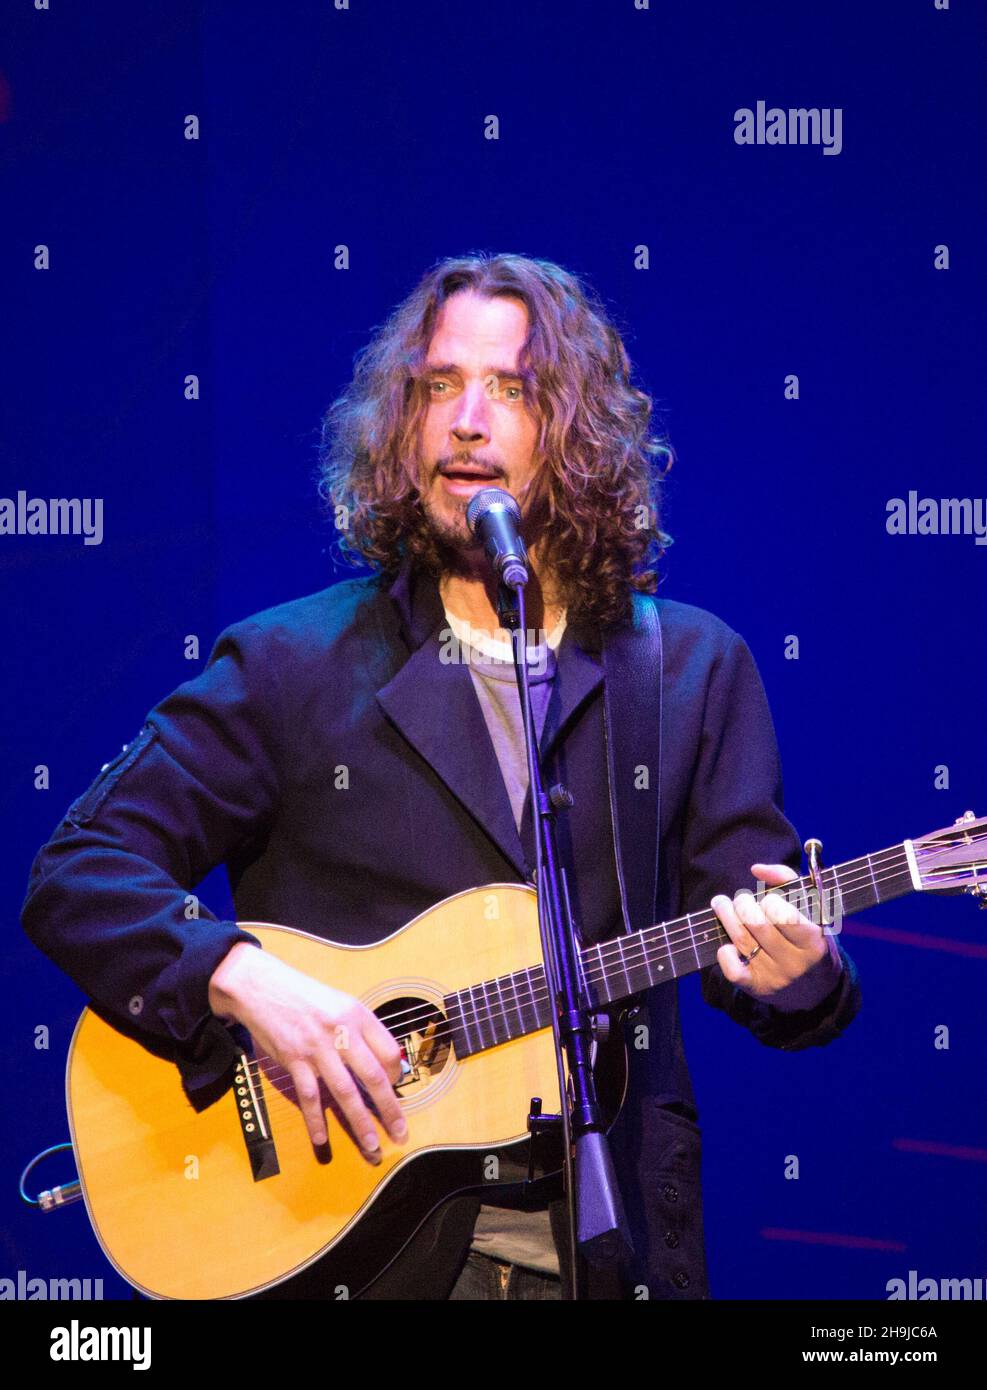 Chris Cornell performing live on stage at the Royal Albert Hall in London during his Higher Truth tour Stock Photo